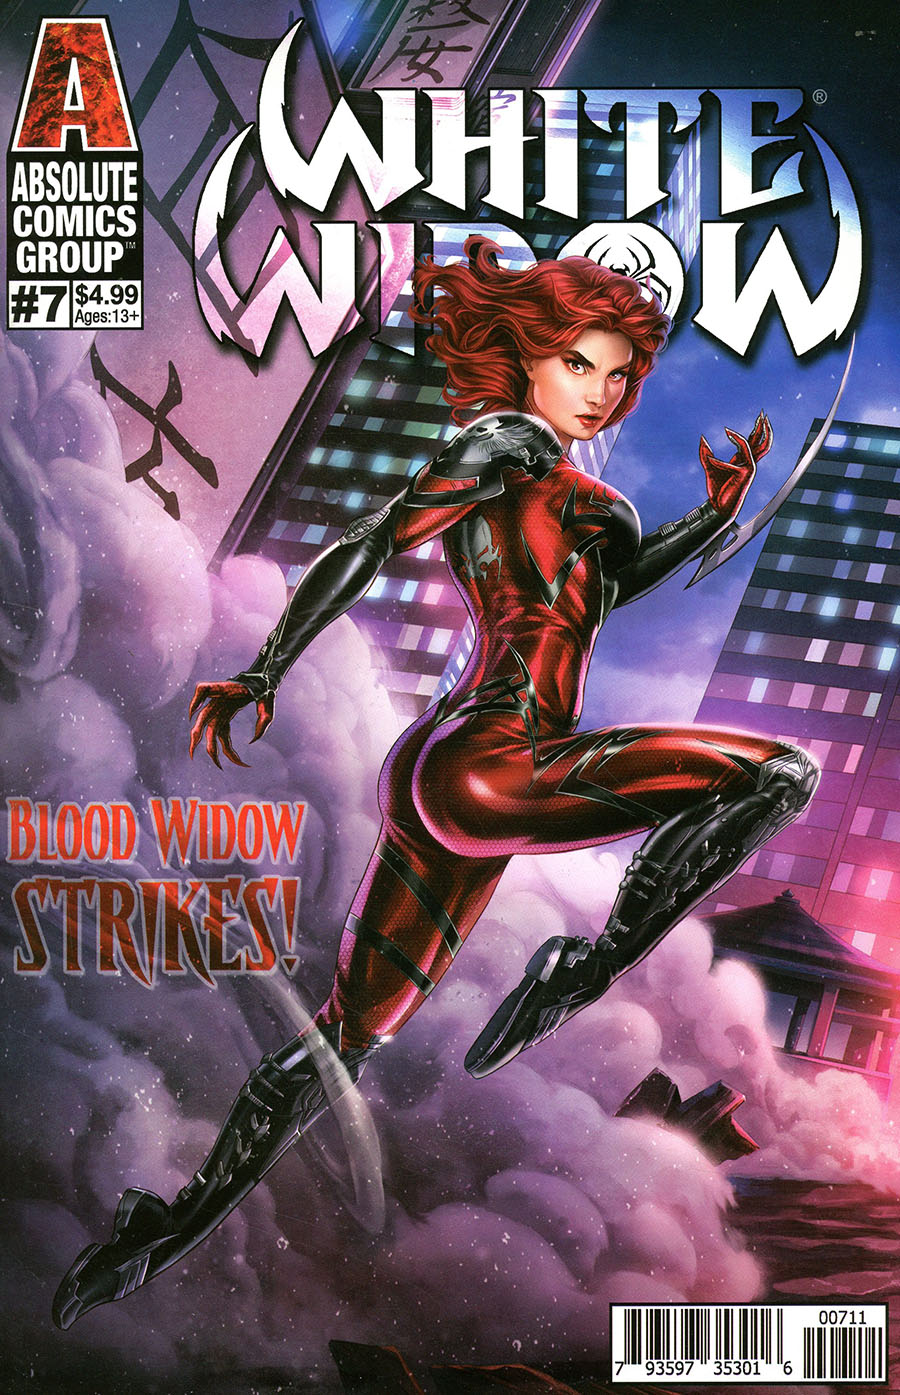 White Widow (Absolute Comics Group) #7 Cover A Regular Dominic Glover Cover